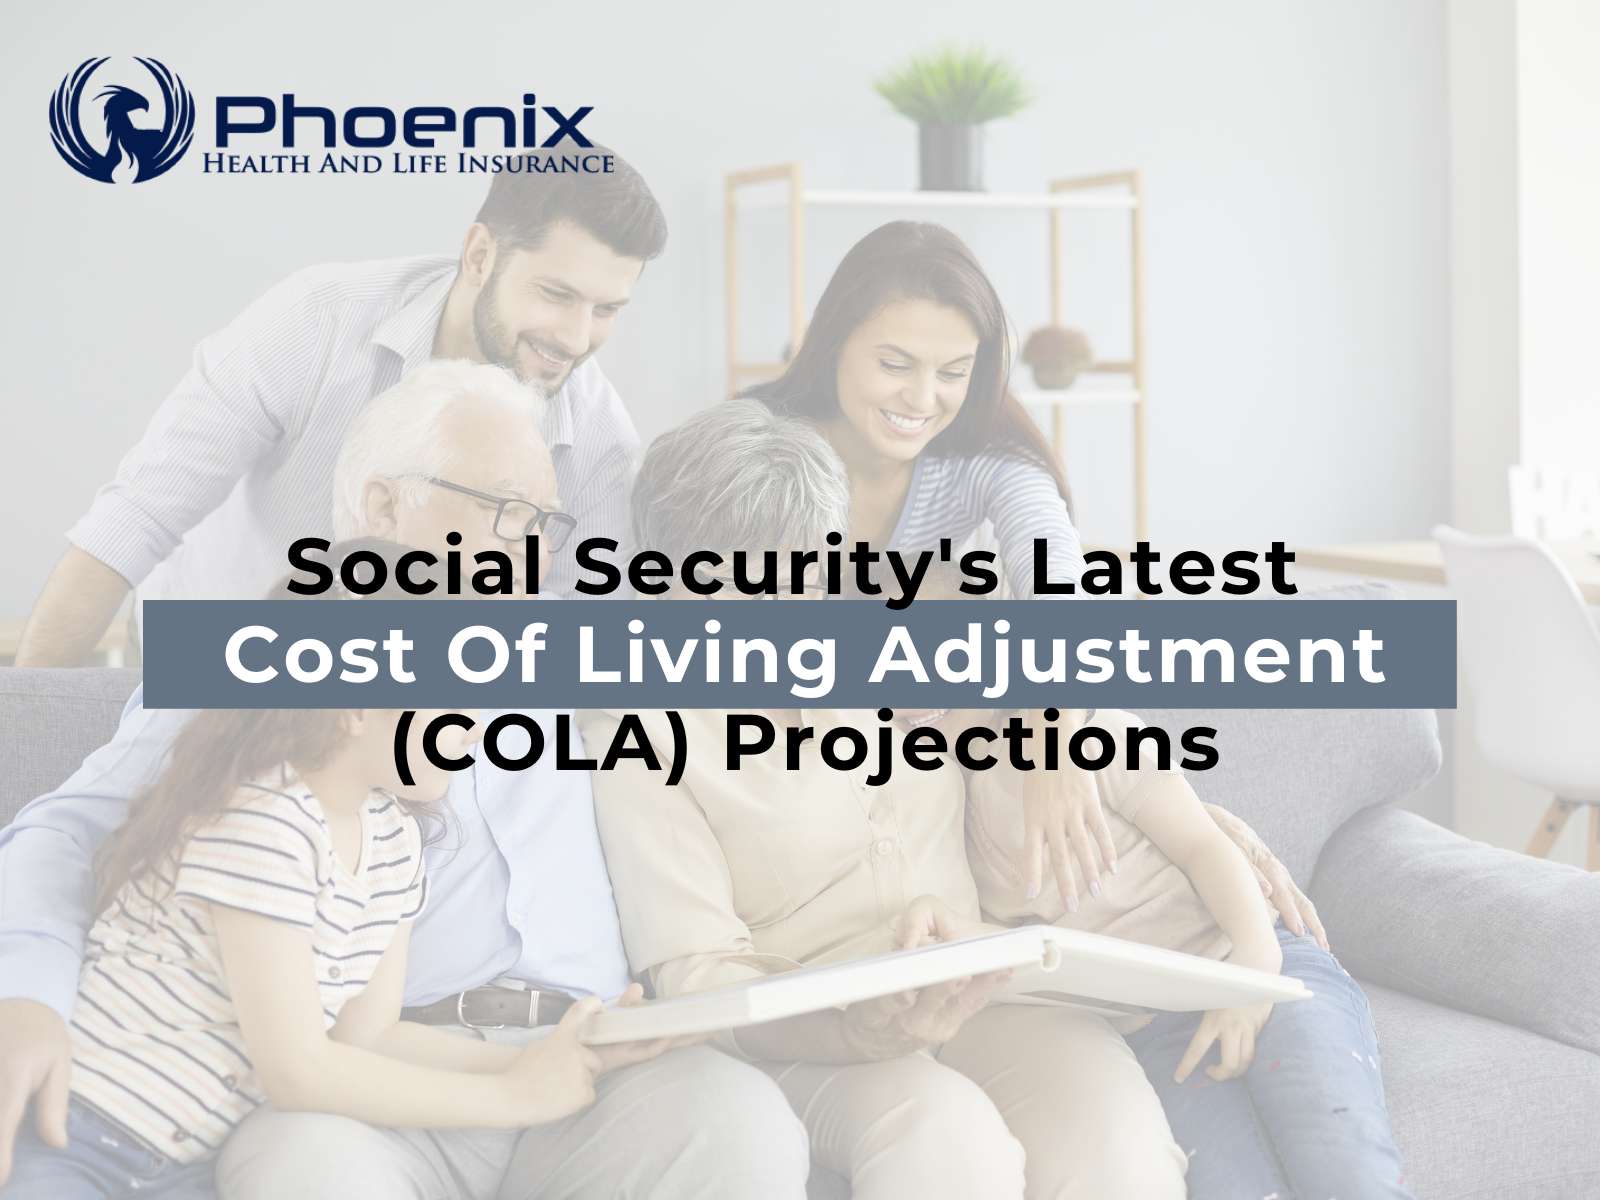 Social Security's Latest Cost Of Living Adjustment (COLA) Projections